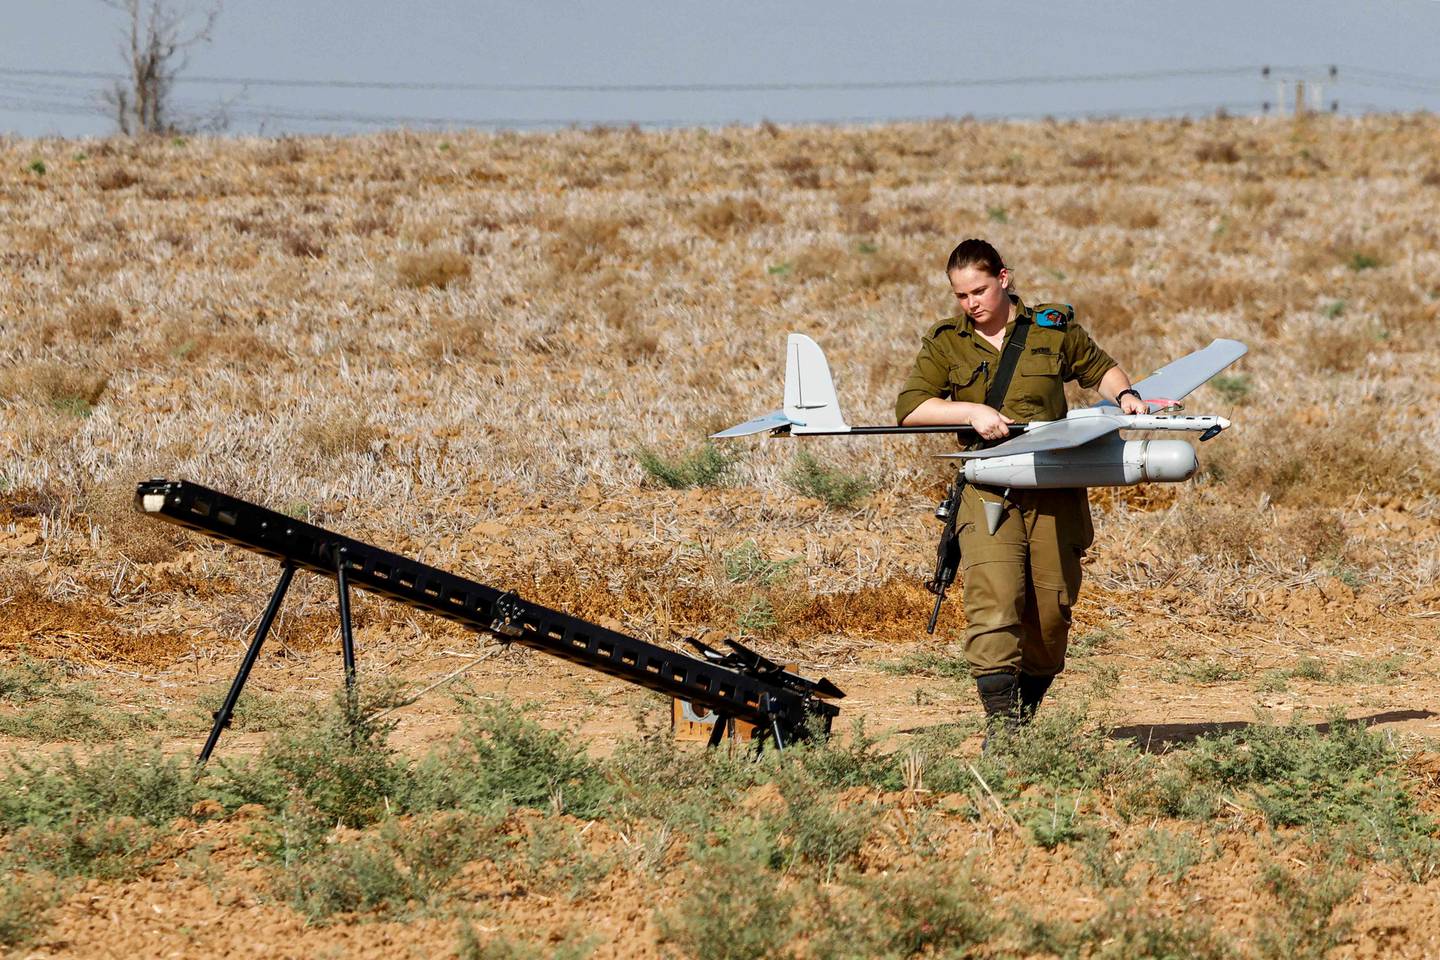 An Israeli soldier prepares an Elbit Systems Skylark I unmanned aerial vehicle (UAV or drone) for take-off near the border with the Gaza Strip in southern Israel in 2020. AFP